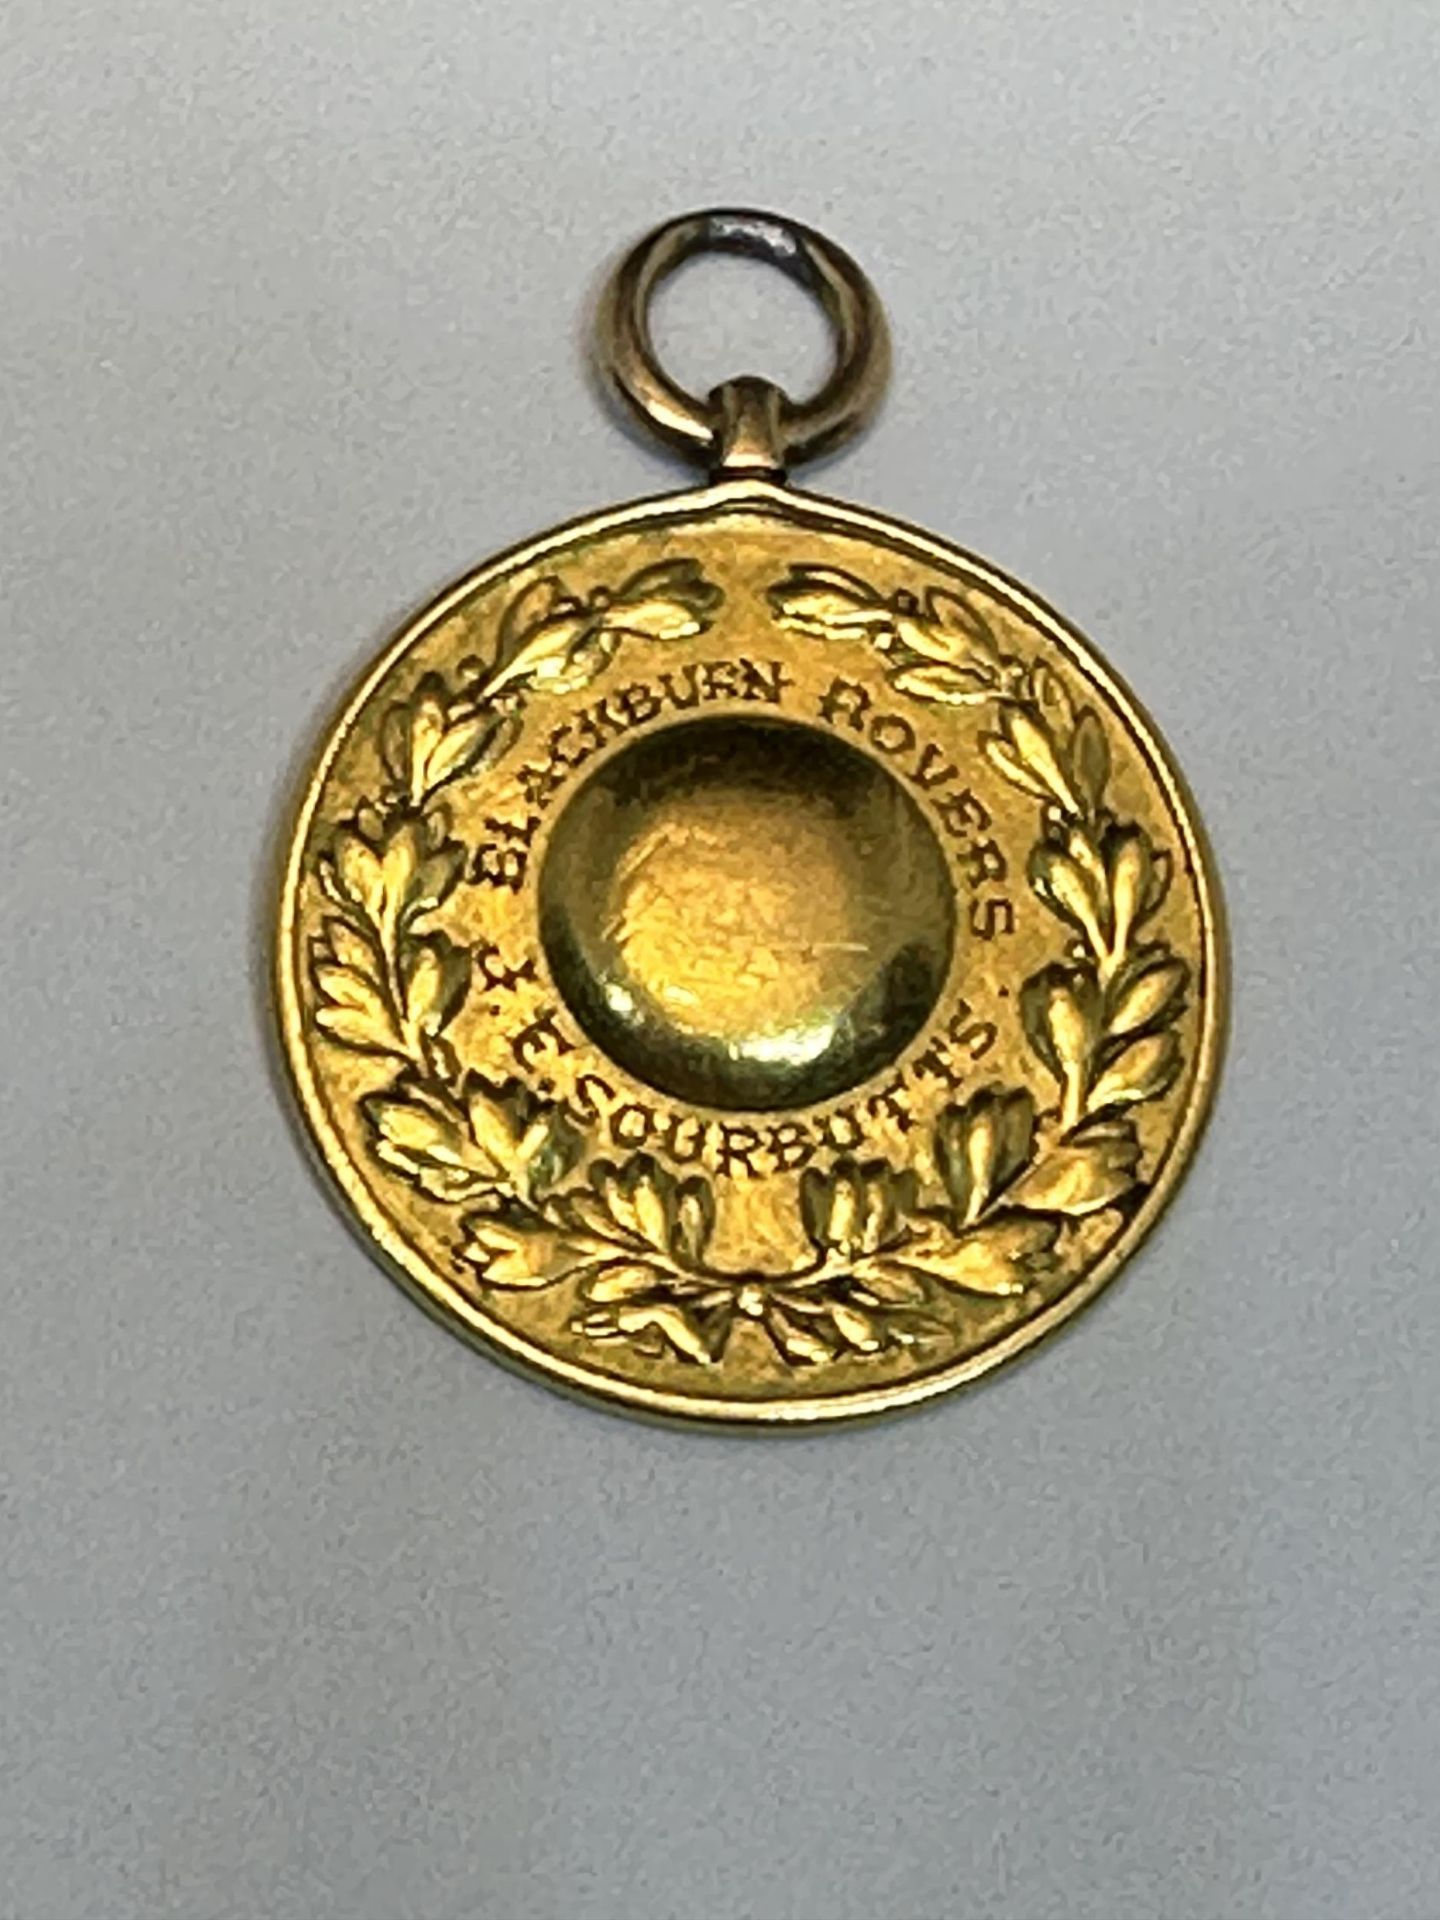 AN 1883/4 F.A. CUP FINAL WINNER'S MEDAL. THIS MEDAL IS TESTED TO 22 CARAT GOLD AND WAS AWARDED TO - Bild 2 aus 3